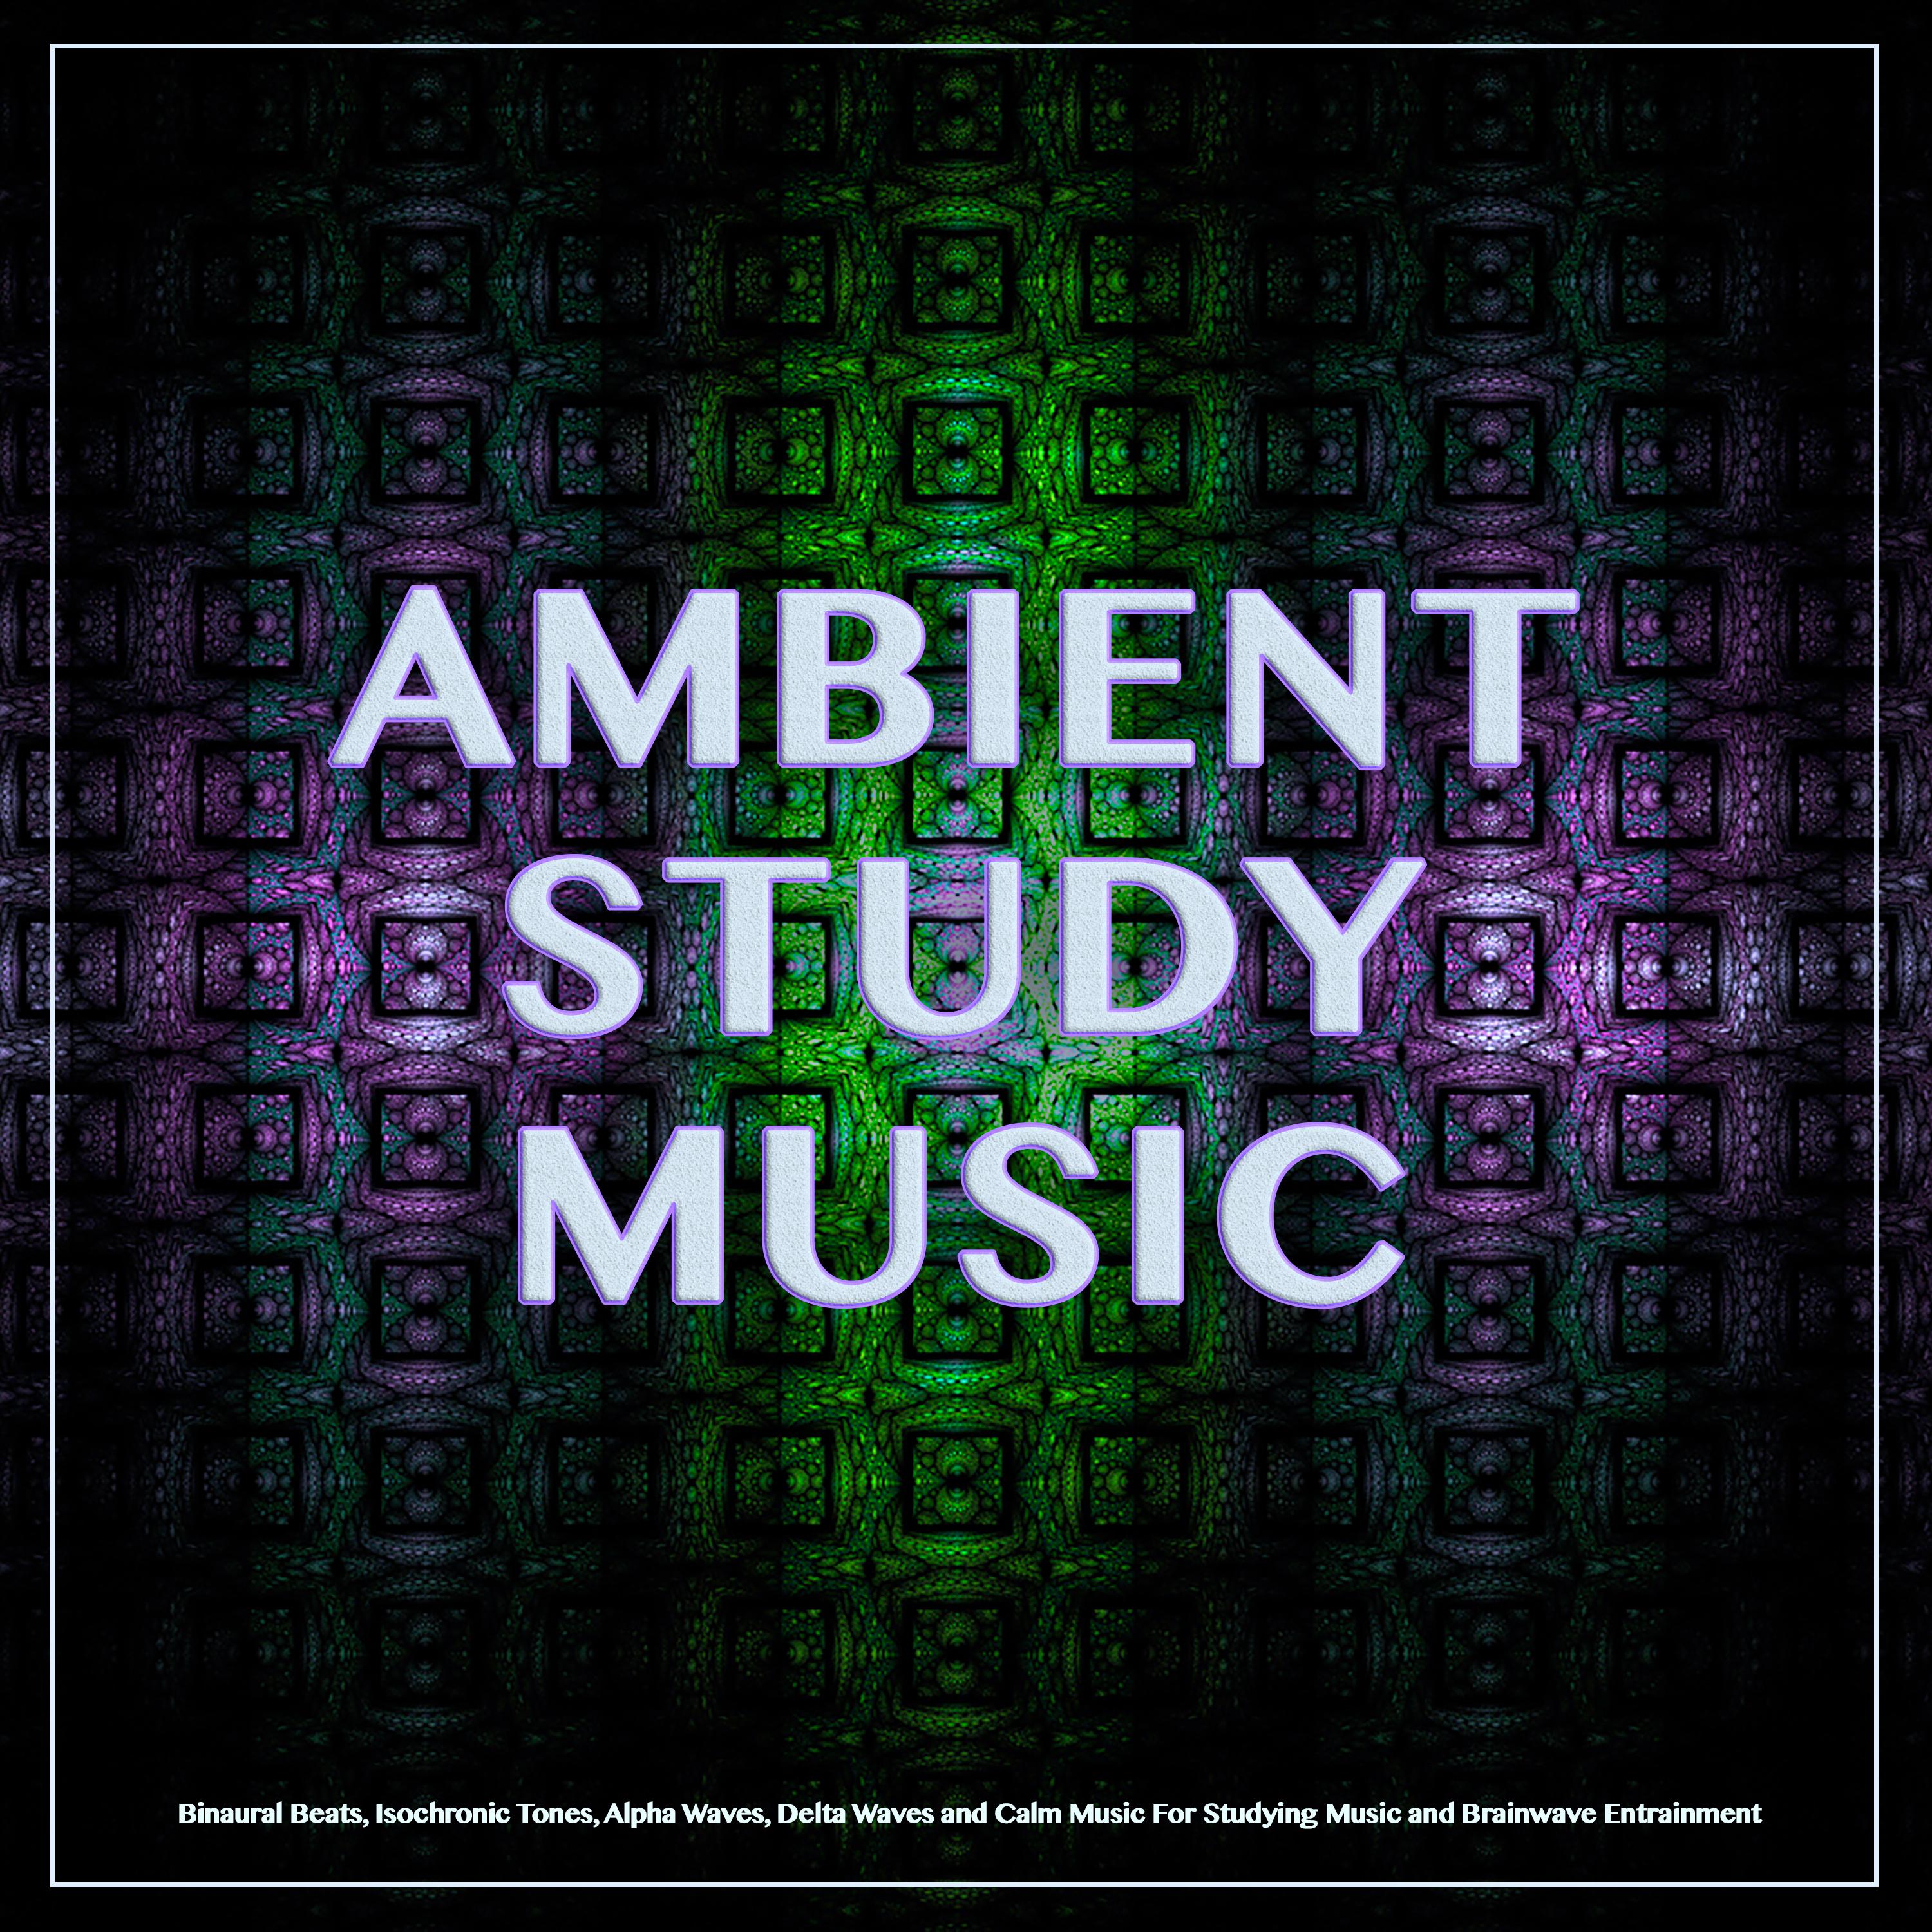 Ambient Study Music: Binaural Beats, Isochronic Tones, Alpha Waves, Delta Waves and Calm Music For Studying Music and Brainwave Entrainment